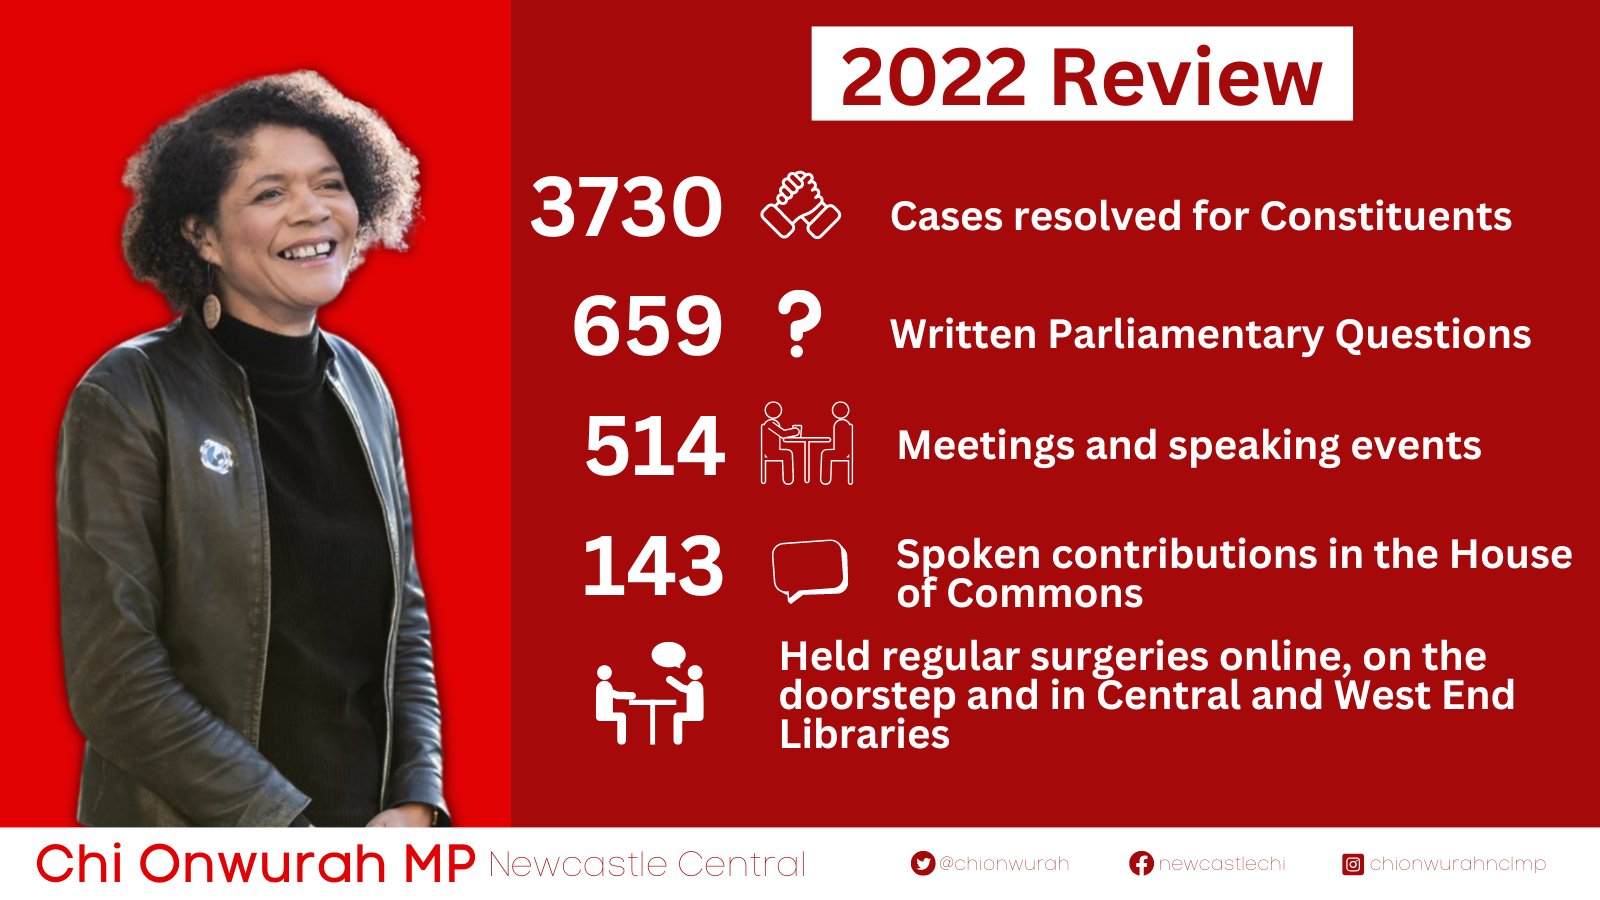 2022 Review in Numbers